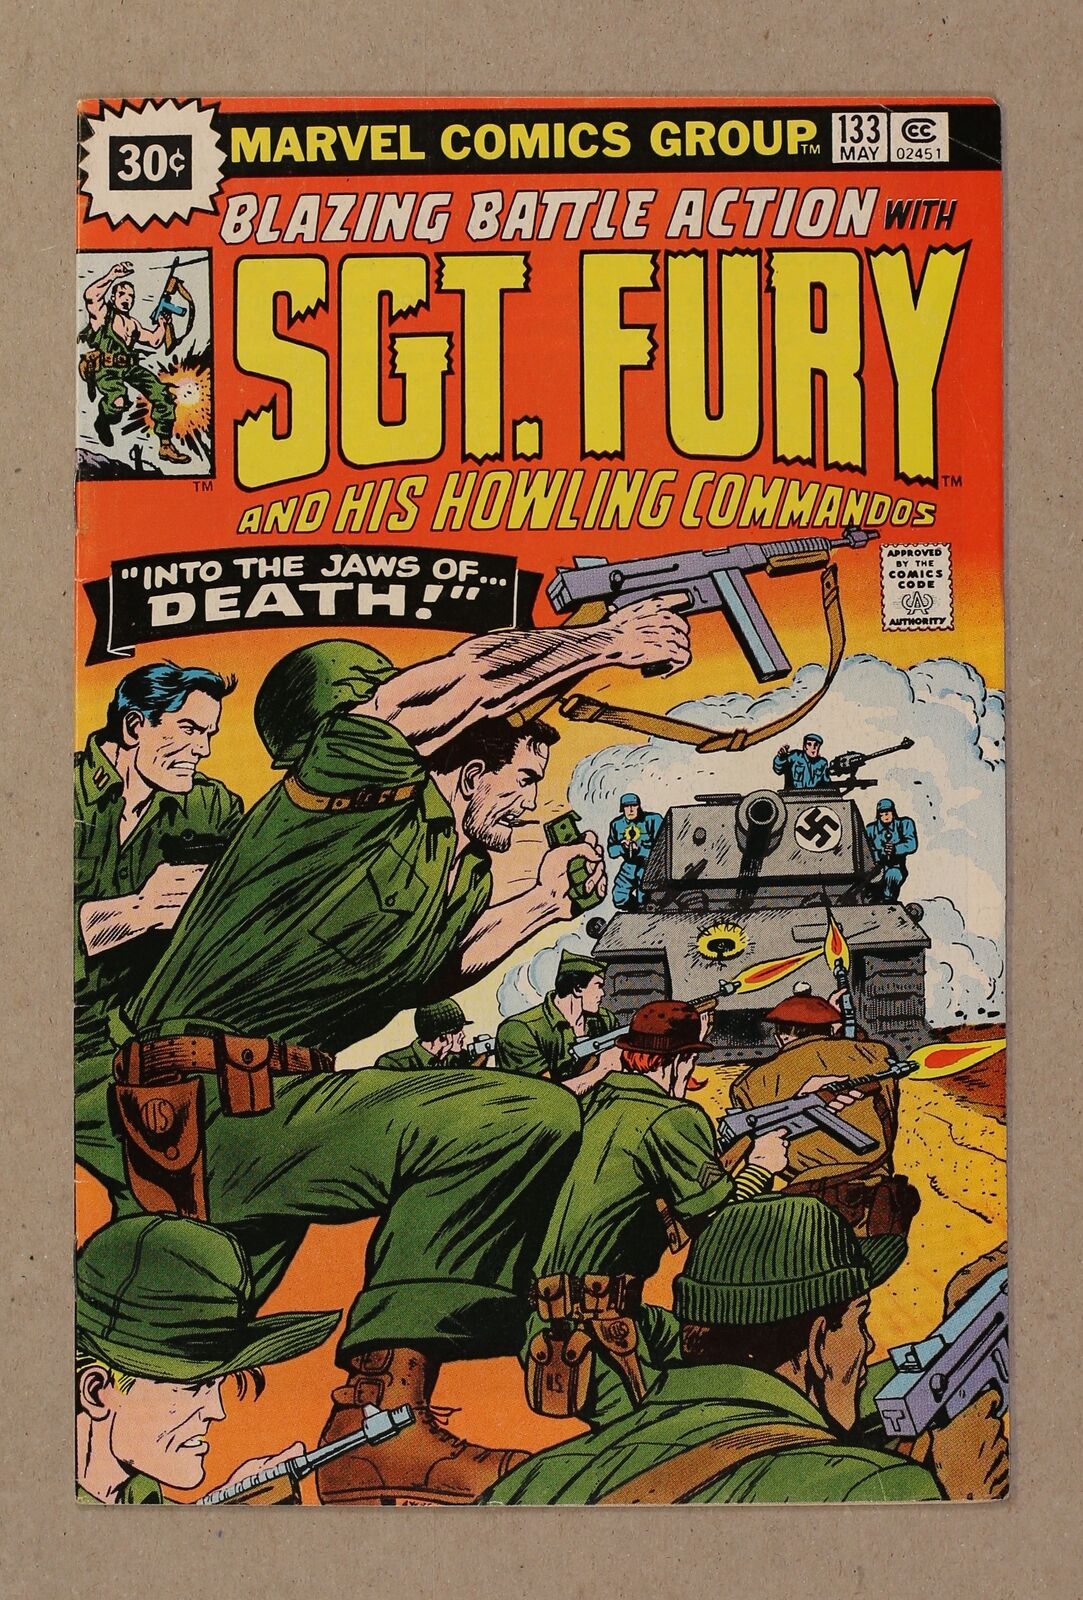 Sgt. Fury 30 Cent Variant #133 FN 6.0 1976